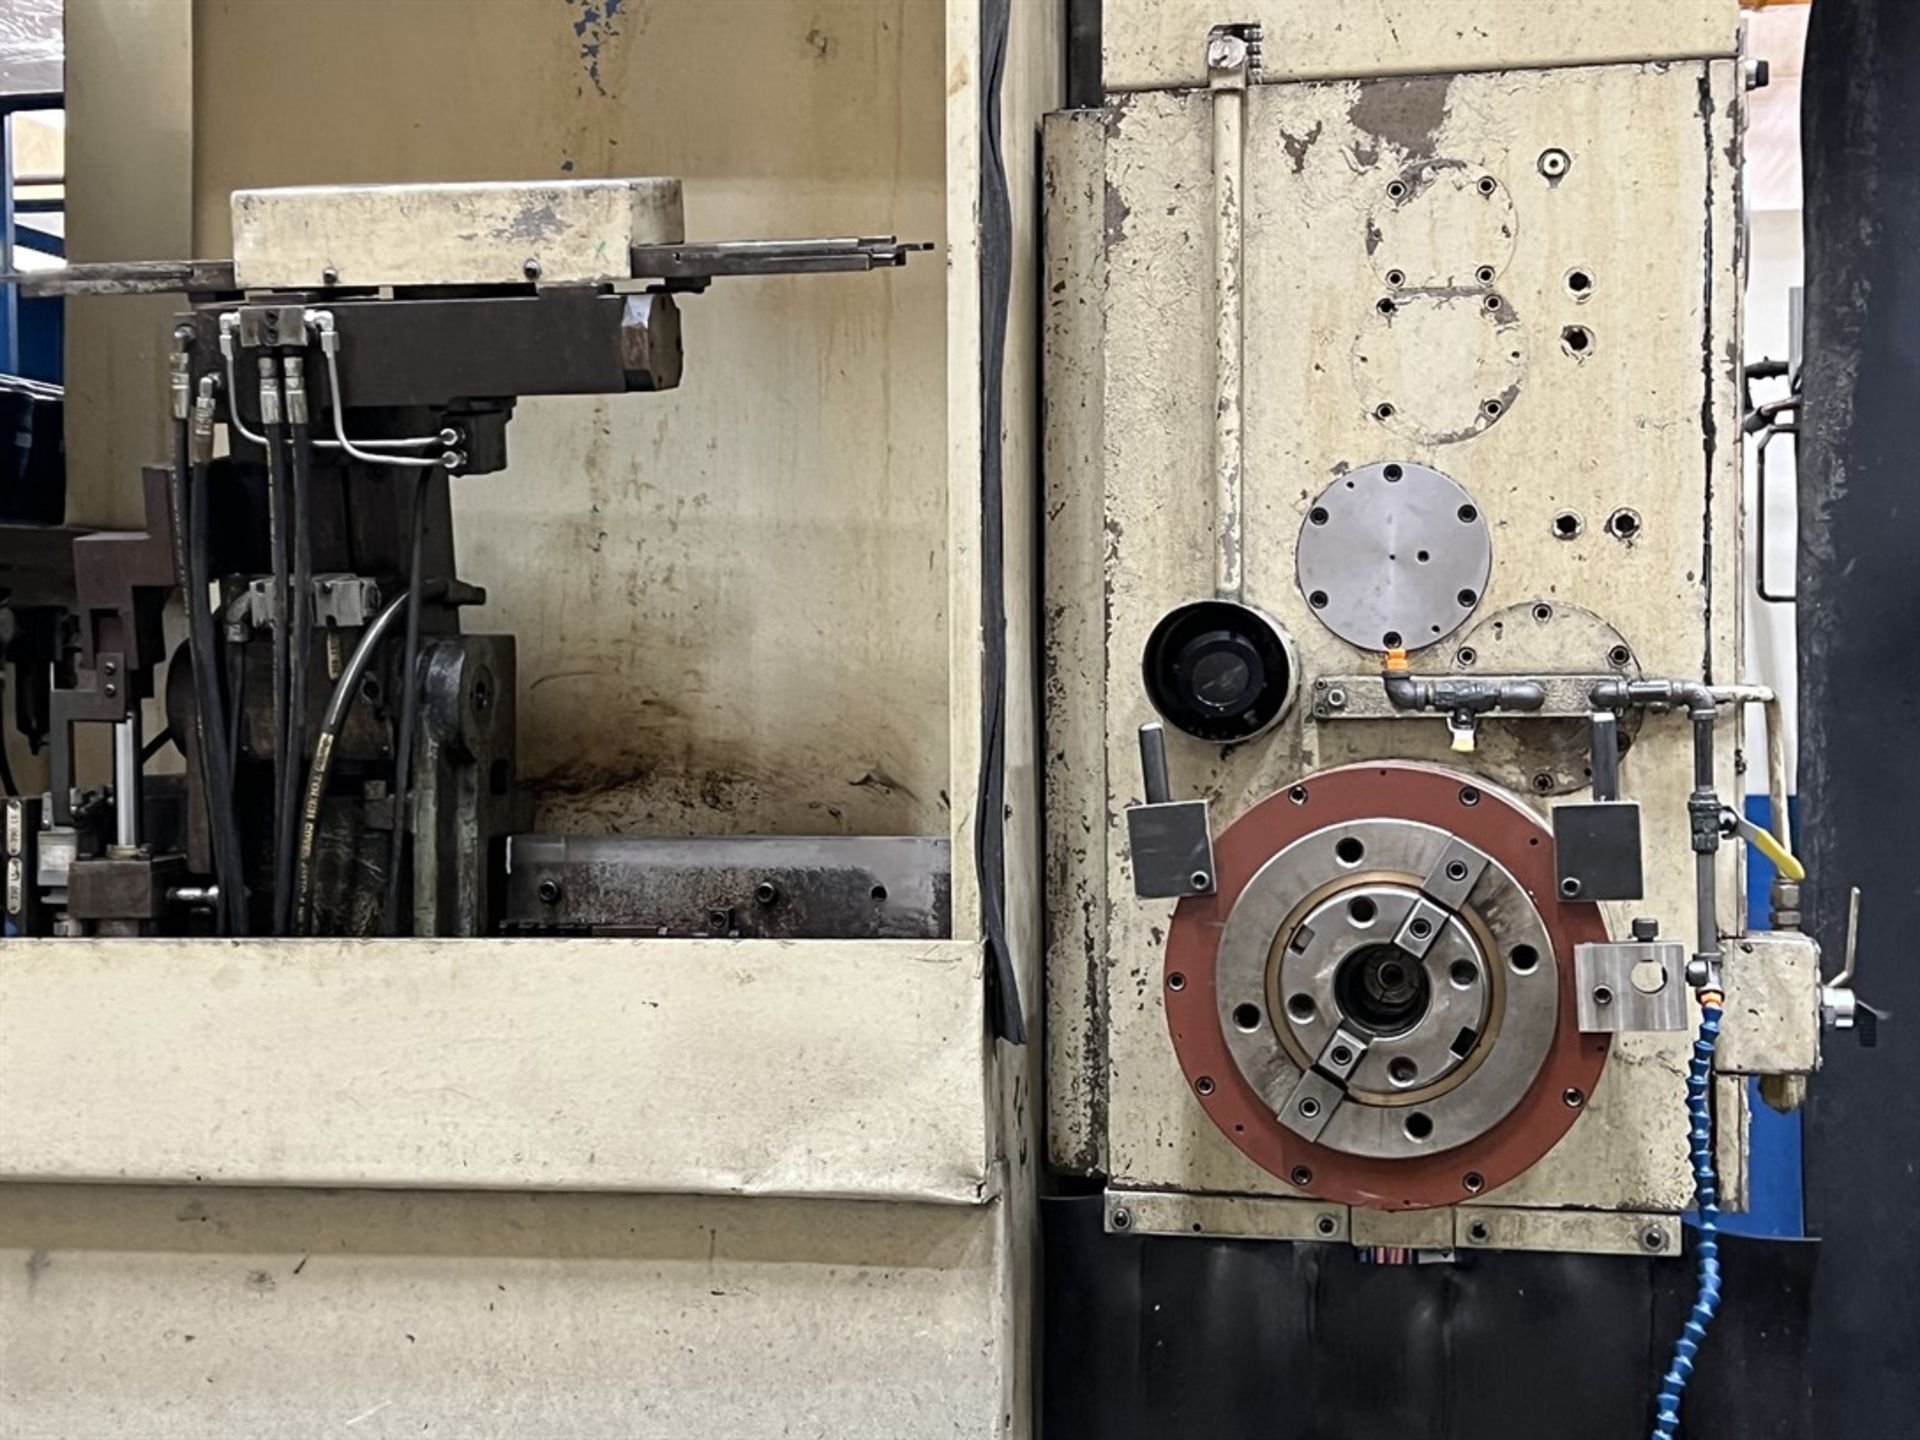 GIDDINGS & LEWIS MC-60 S Horizontal Machining Center, s/n 450-172-86, G & L 8000 Control, 6” Spindle - Image 5 of 12